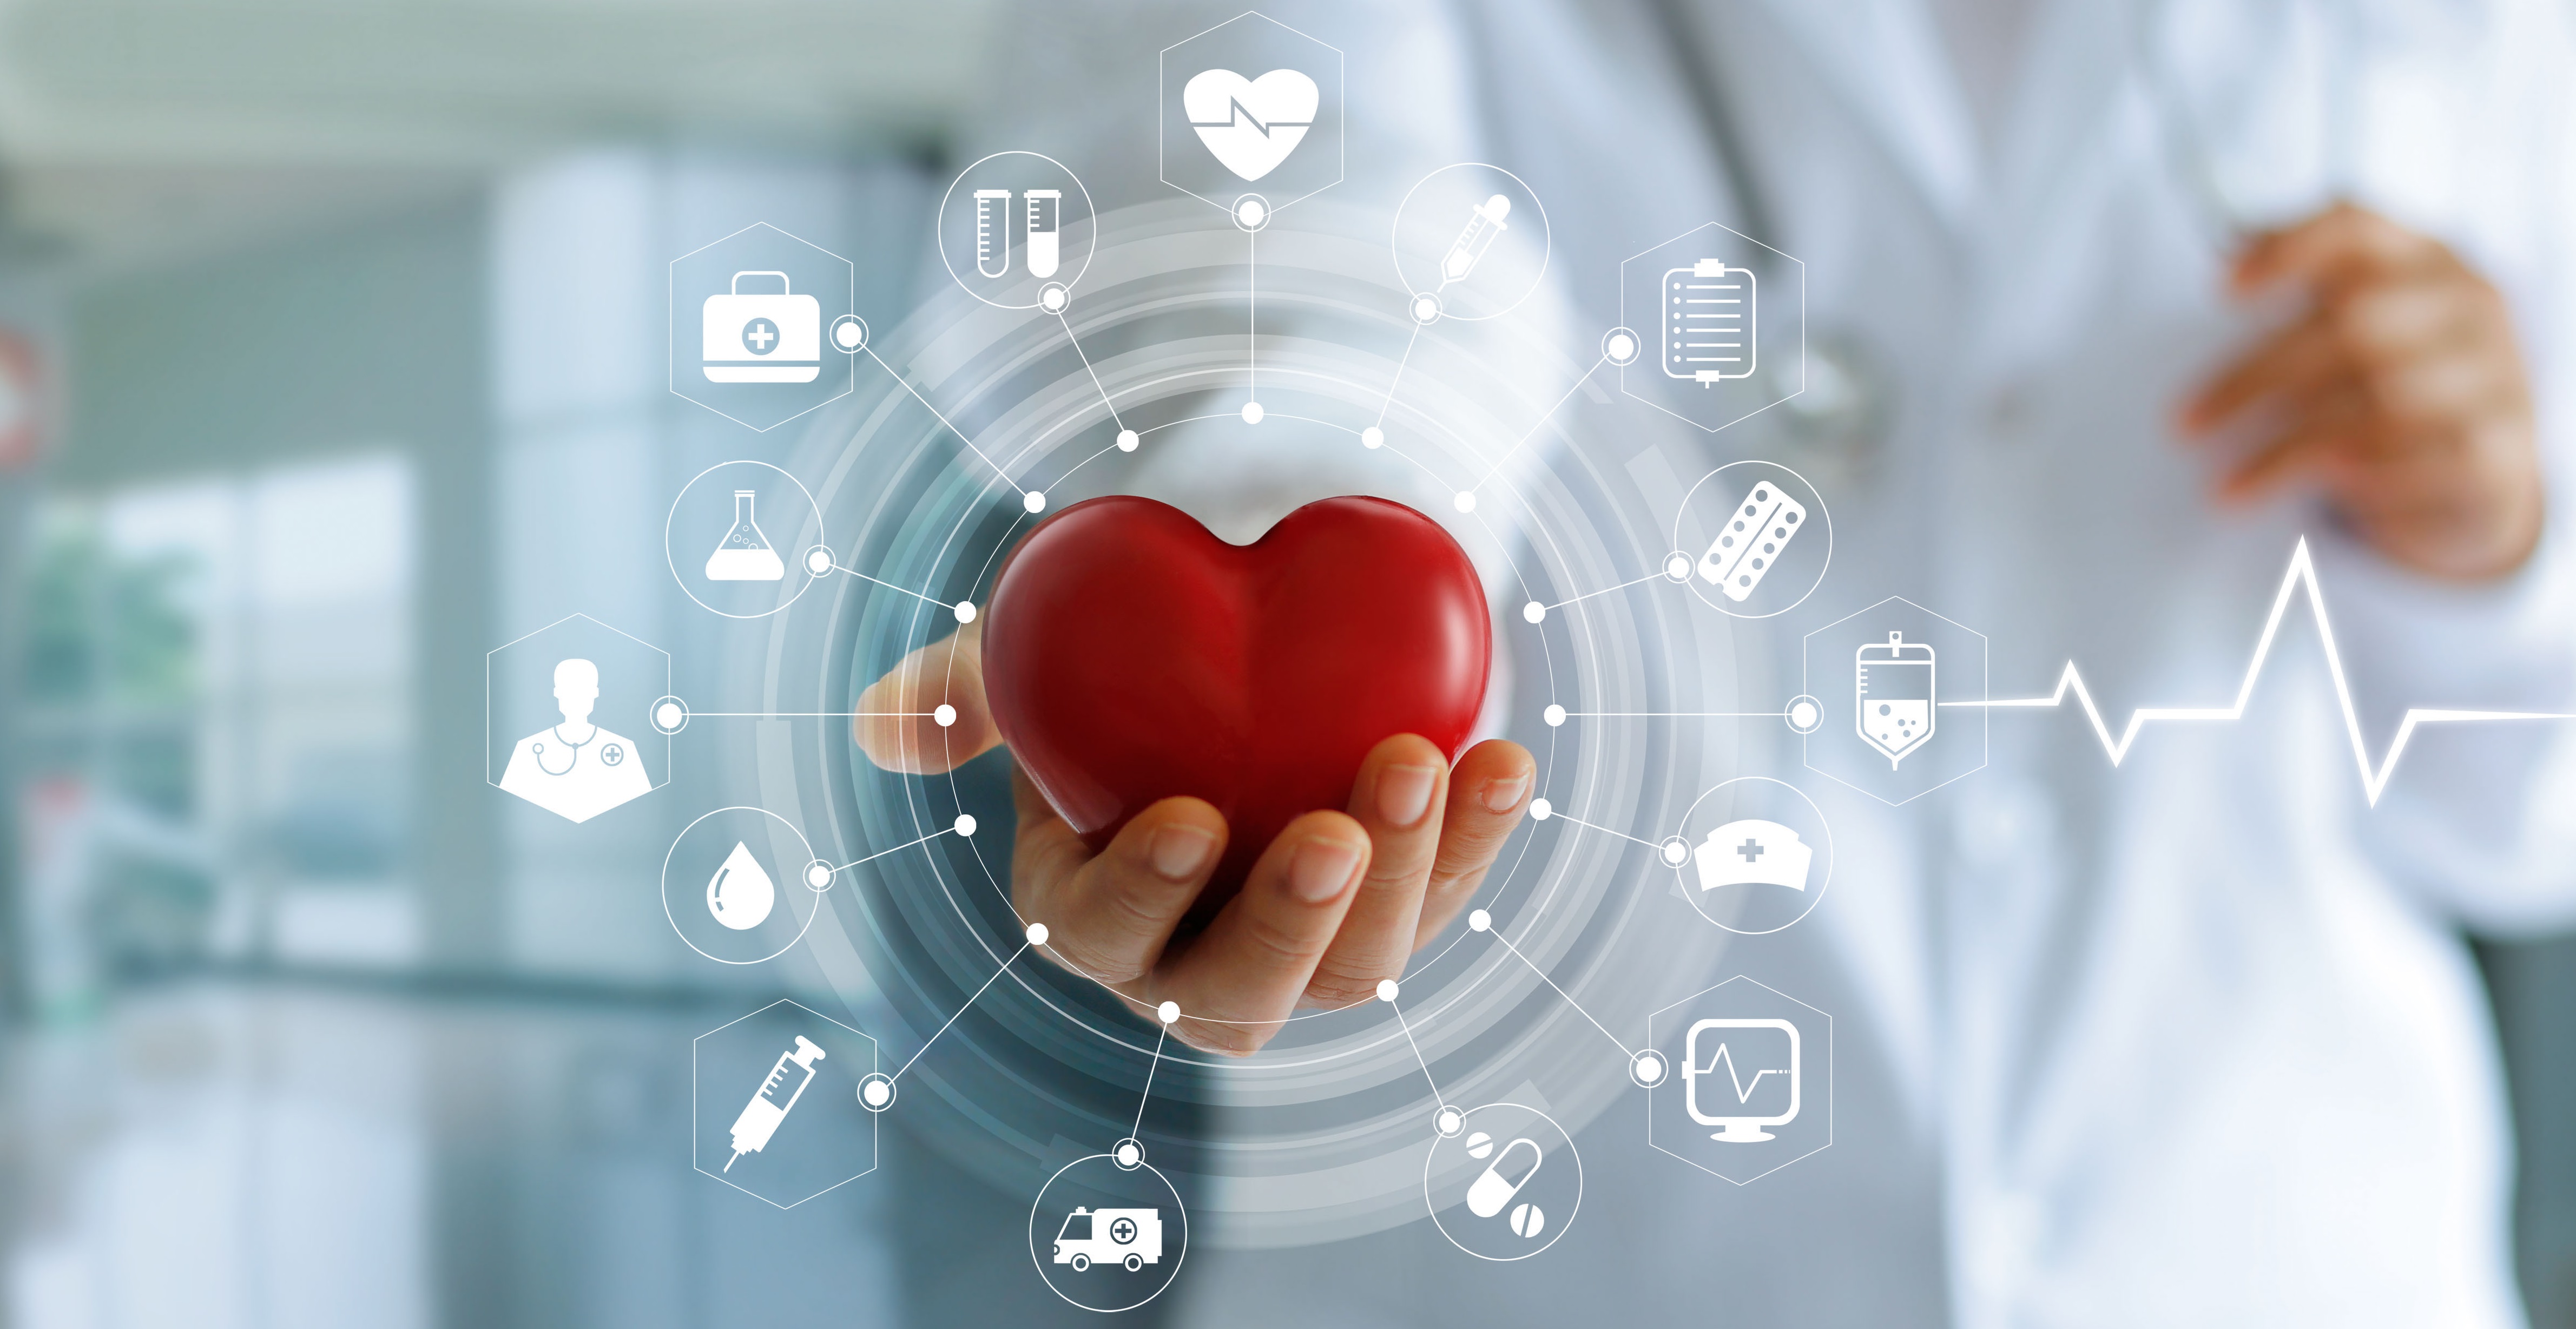 Medicine doctor holding red heart shape in hand and icon medical network connection with modern virtual screen interface, medical technology network concept